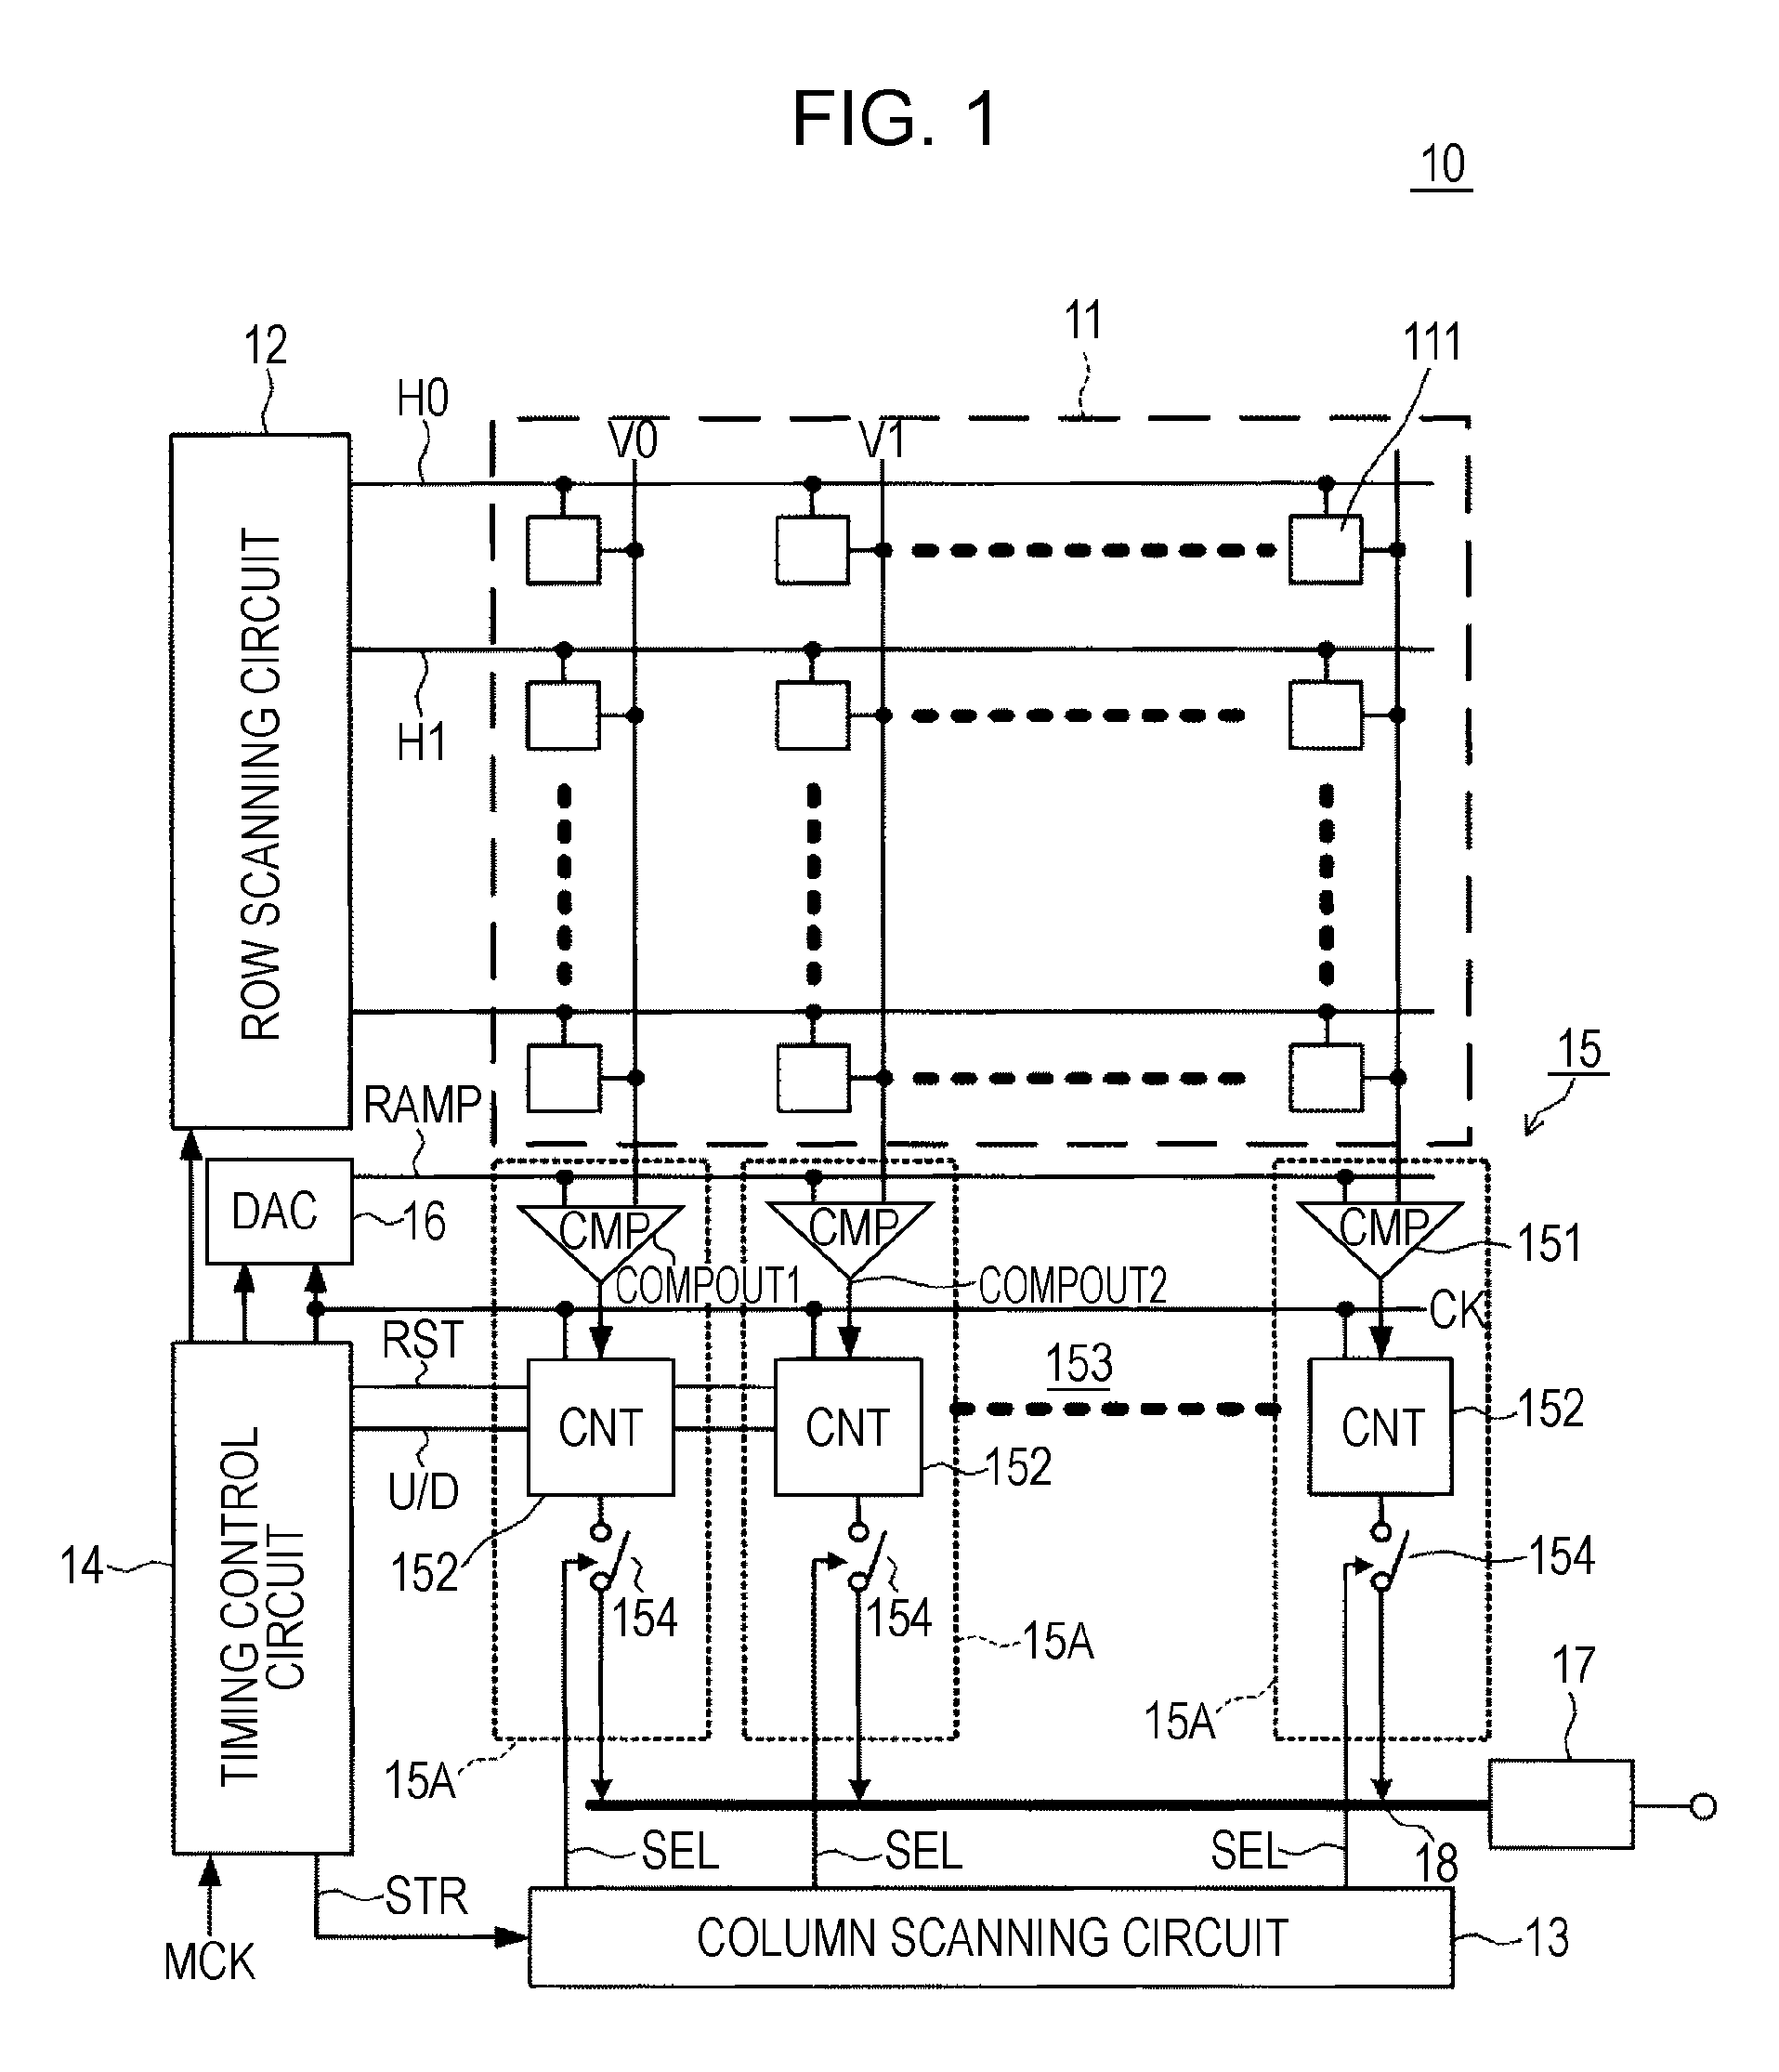 A/d conversion circuit, solid-state image sensor, and camera system